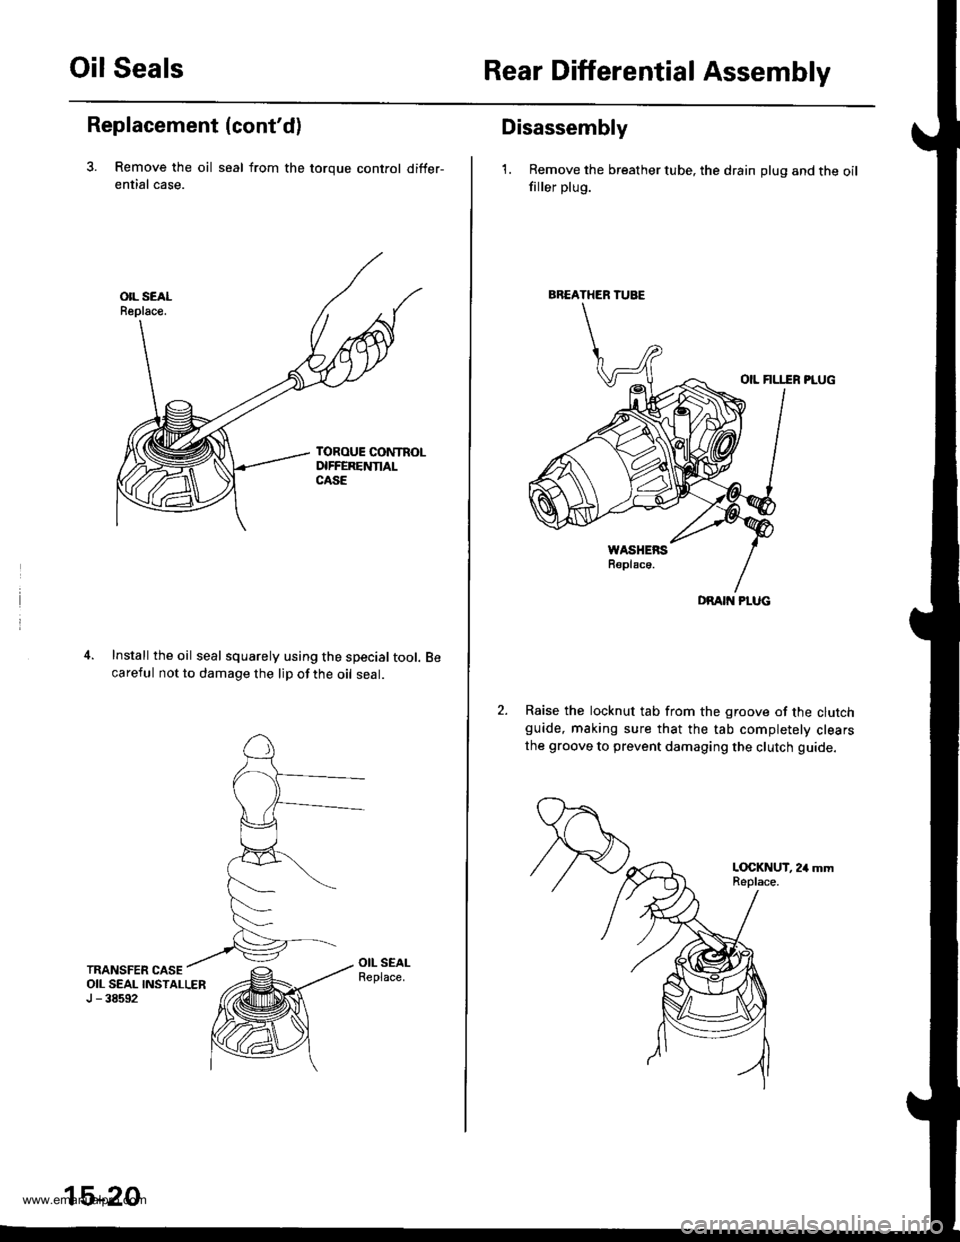 HONDA CR-V 1998 RD1-RD3 / 1.G Service Manual 
Oil SealsRear Differential Assembly
Replacement (contd)
3. Remove the oil seal from the toroue control differ-
ential case.
Install the oil seal squarely using the special tool.careful not to damage